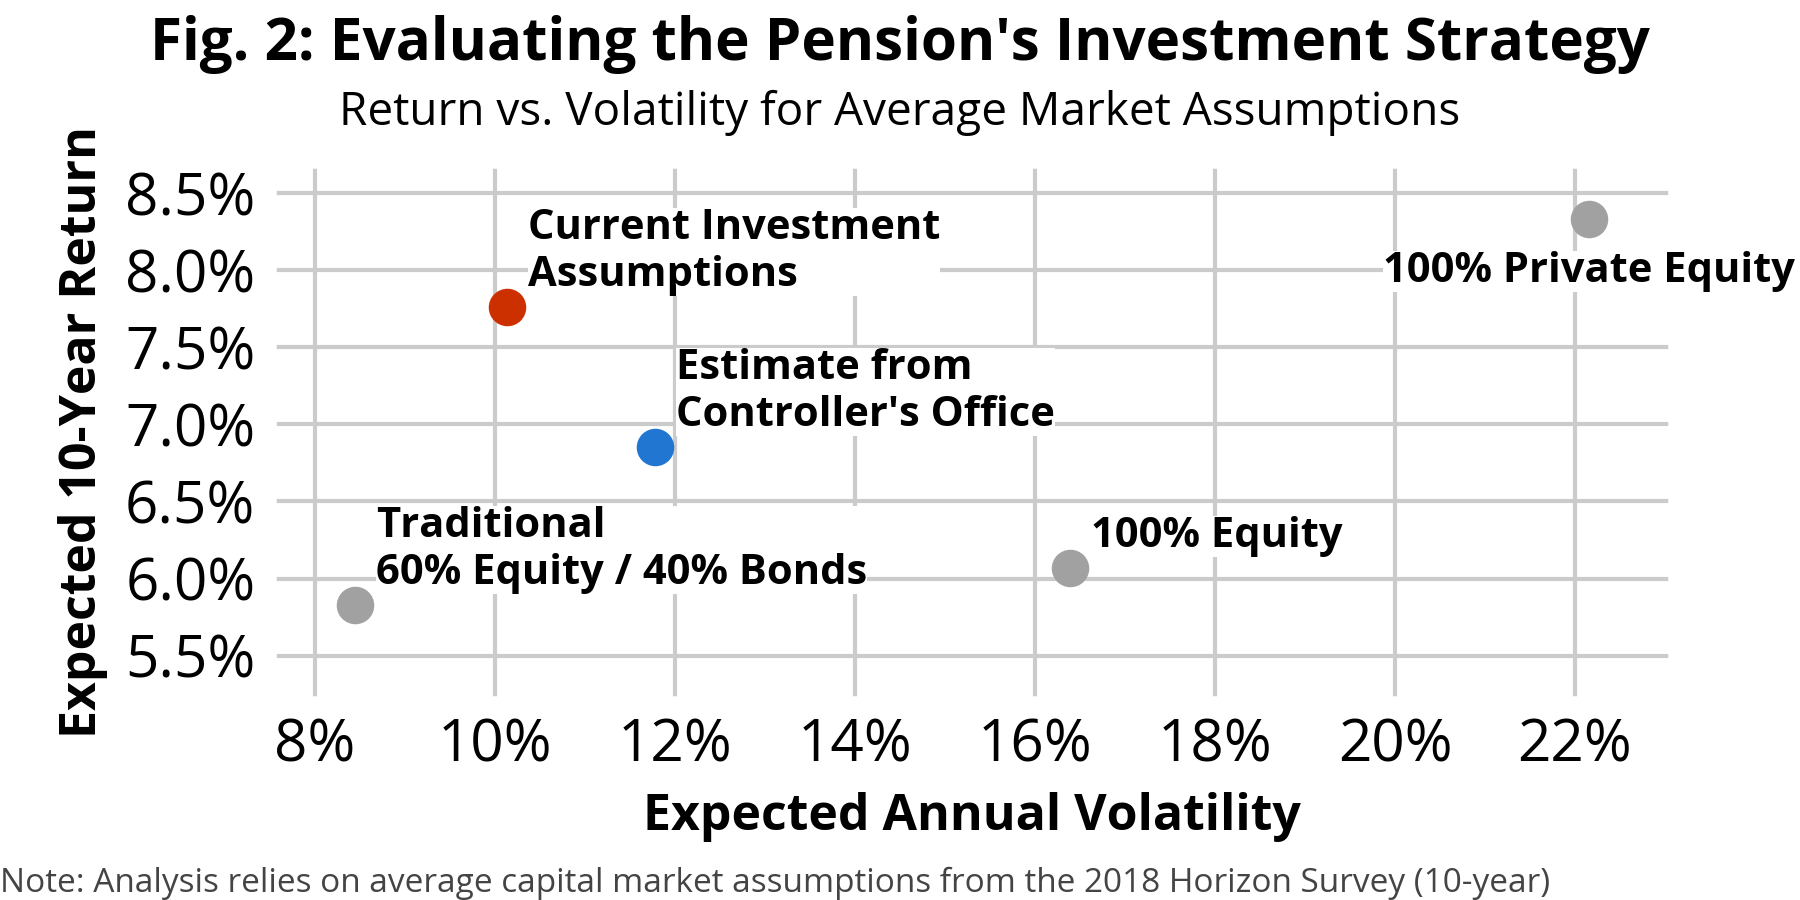 Evaluating the Pension's Investment Strategy